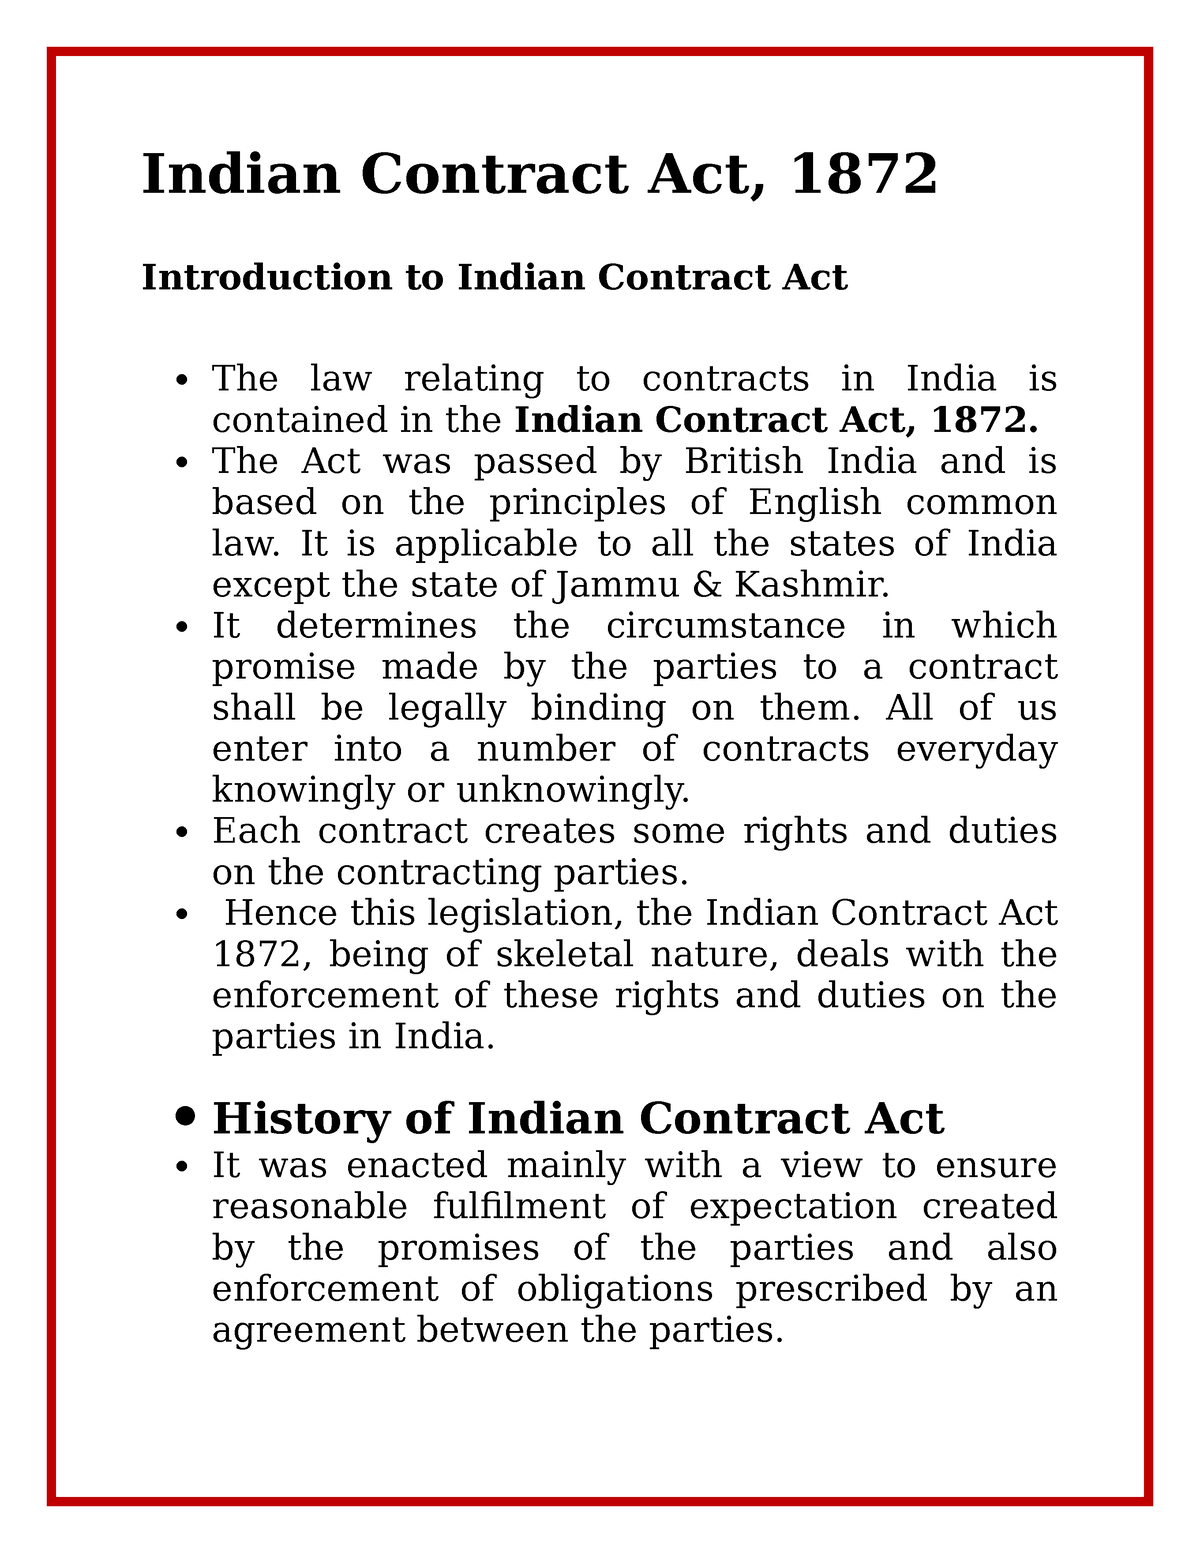 assignment agreement under indian contract act